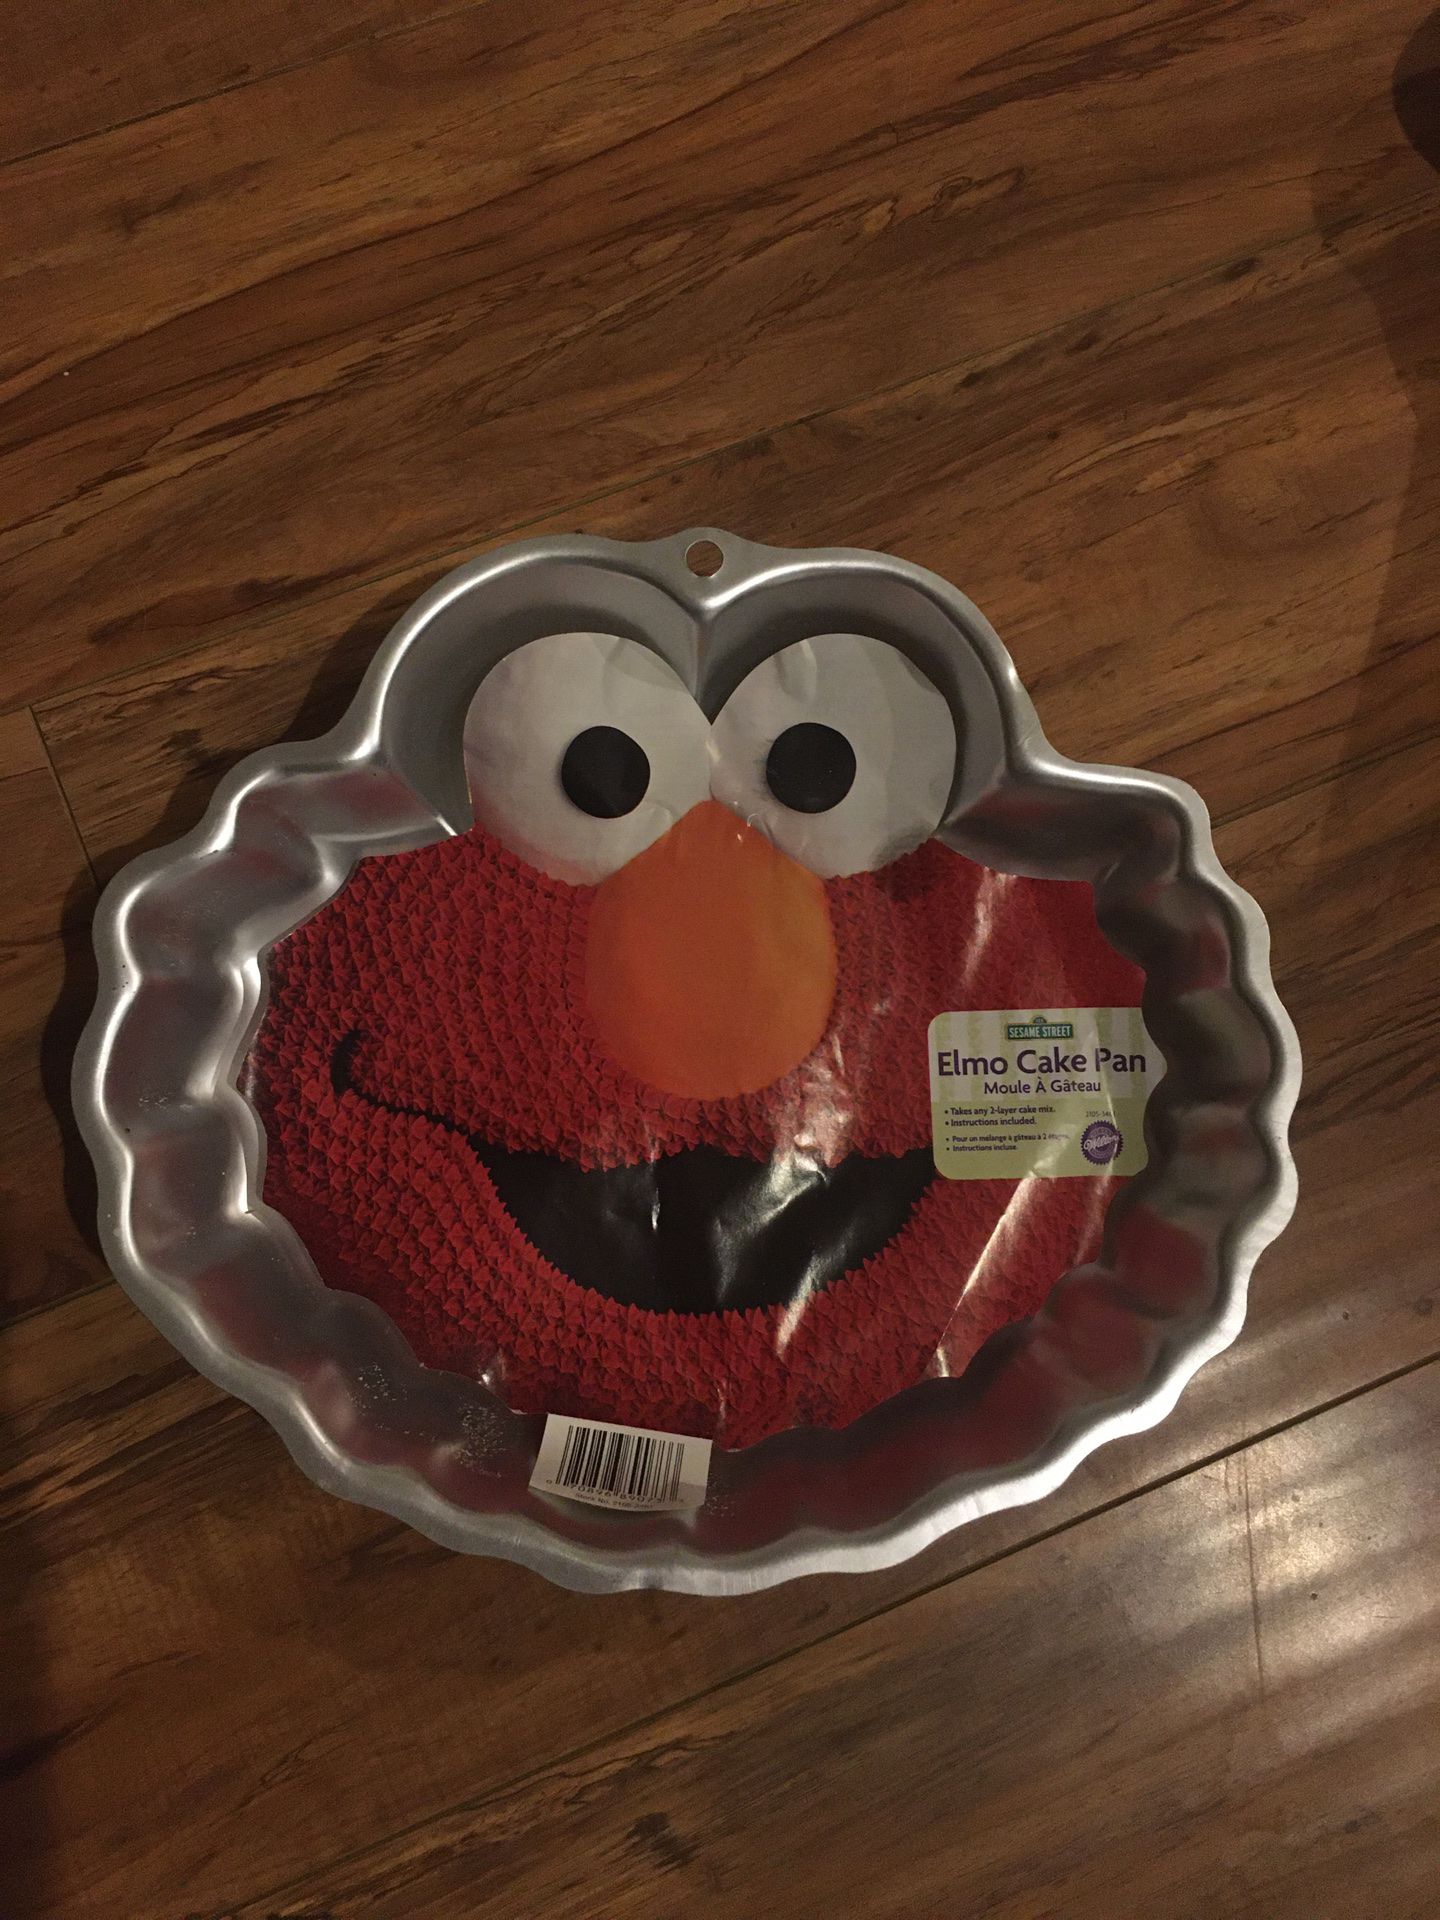 Elmo cake pan with instructions